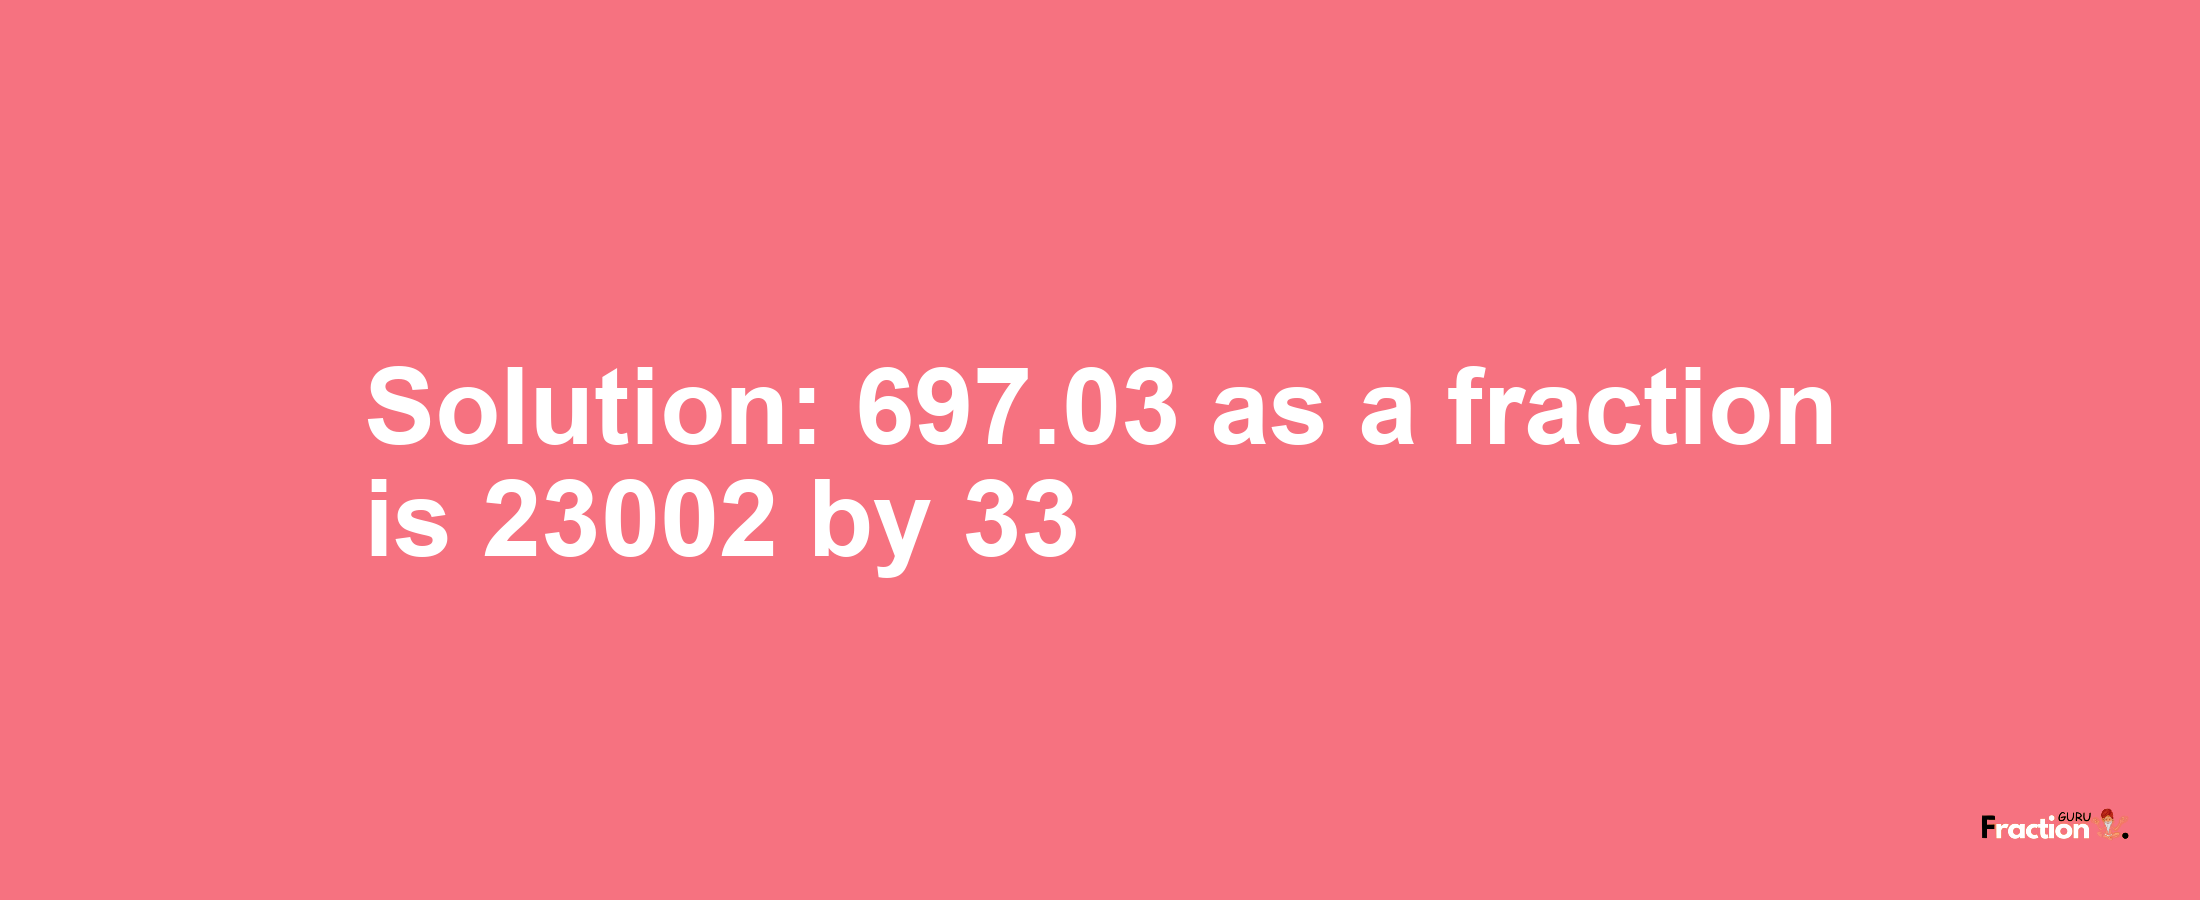 Solution:697.03 as a fraction is 23002/33